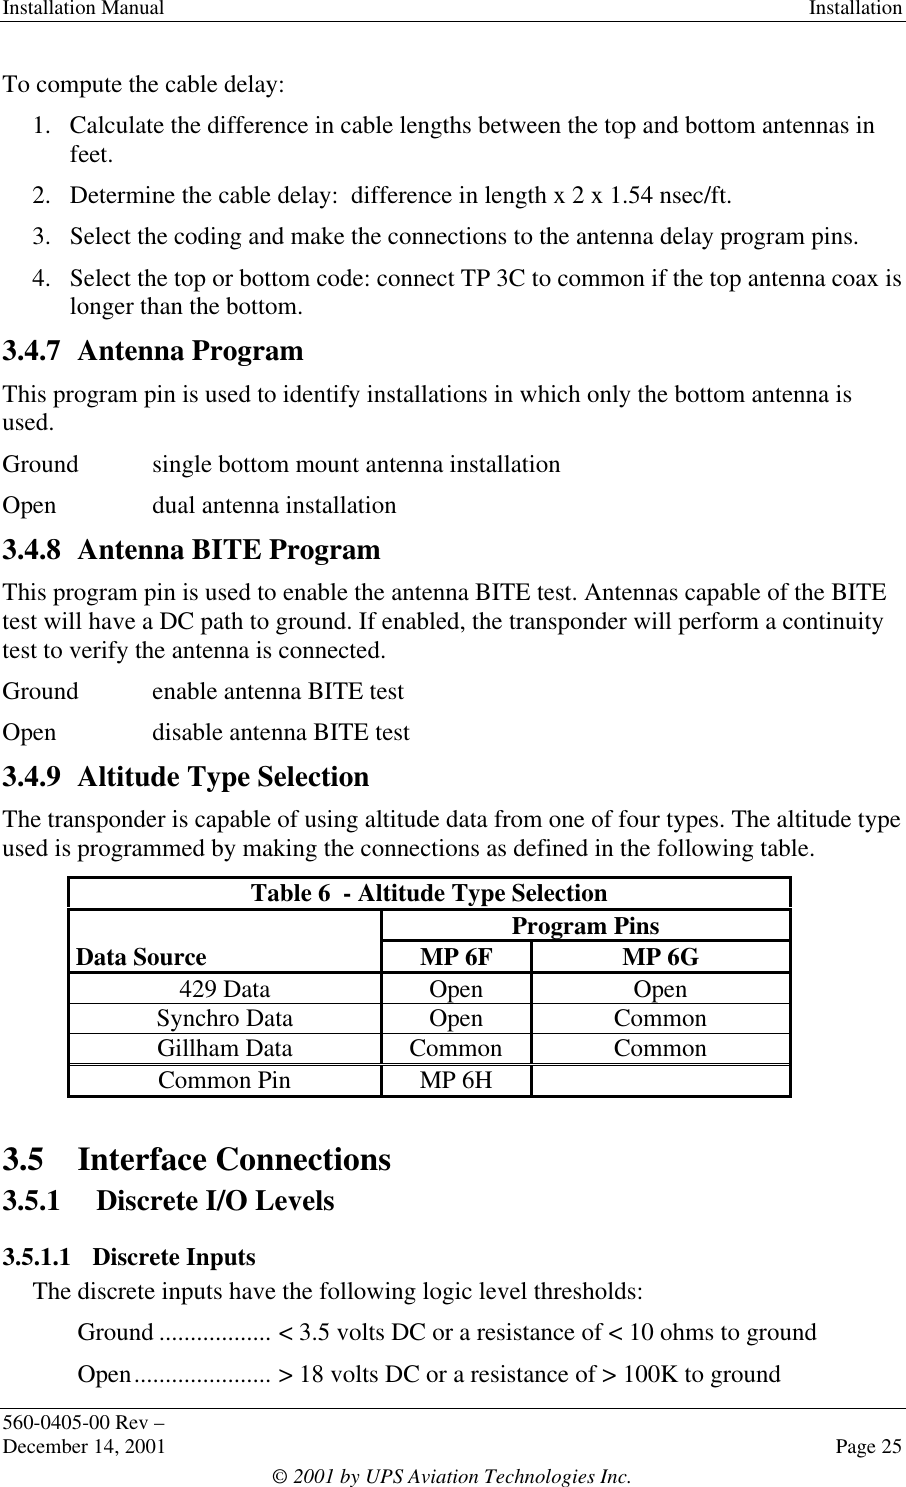 Installation Manual Installation560-0405-00 Rev –December 14, 2001 Page 25© 2001 by UPS Aviation Technologies Inc.To compute the cable delay:1. Calculate the difference in cable lengths between the top and bottom antennas infeet.2. Determine the cable delay:  difference in length x 2 x 1.54 nsec/ft.3. Select the coding and make the connections to the antenna delay program pins.4. Select the top or bottom code: connect TP 3C to common if the top antenna coax islonger than the bottom.3.4.7 Antenna ProgramThis program pin is used to identify installations in which only the bottom antenna isused.Ground single bottom mount antenna installationOpen dual antenna installation3.4.8 Antenna BITE ProgramThis program pin is used to enable the antenna BITE test. Antennas capable of the BITEtest will have a DC path to ground. If enabled, the transponder will perform a continuitytest to verify the antenna is connected.Ground enable antenna BITE testOpen disable antenna BITE test3.4.9 Altitude Type SelectionThe transponder is capable of using altitude data from one of four types. The altitude typeused is programmed by making the connections as defined in the following table.Table 6  - Altitude Type SelectionProgram PinsData Source MP 6F MP 6G429 Data Open OpenSynchro Data Open CommonGillham Data Common CommonCommon Pin MP 6H3.5 Interface Connections3.5.1 Discrete I/O Levels3.5.1.1 Discrete InputsThe discrete inputs have the following logic level thresholds:Ground .................. &lt; 3.5 volts DC or a resistance of &lt; 10 ohms to groundOpen...................... &gt; 18 volts DC or a resistance of &gt; 100K to ground